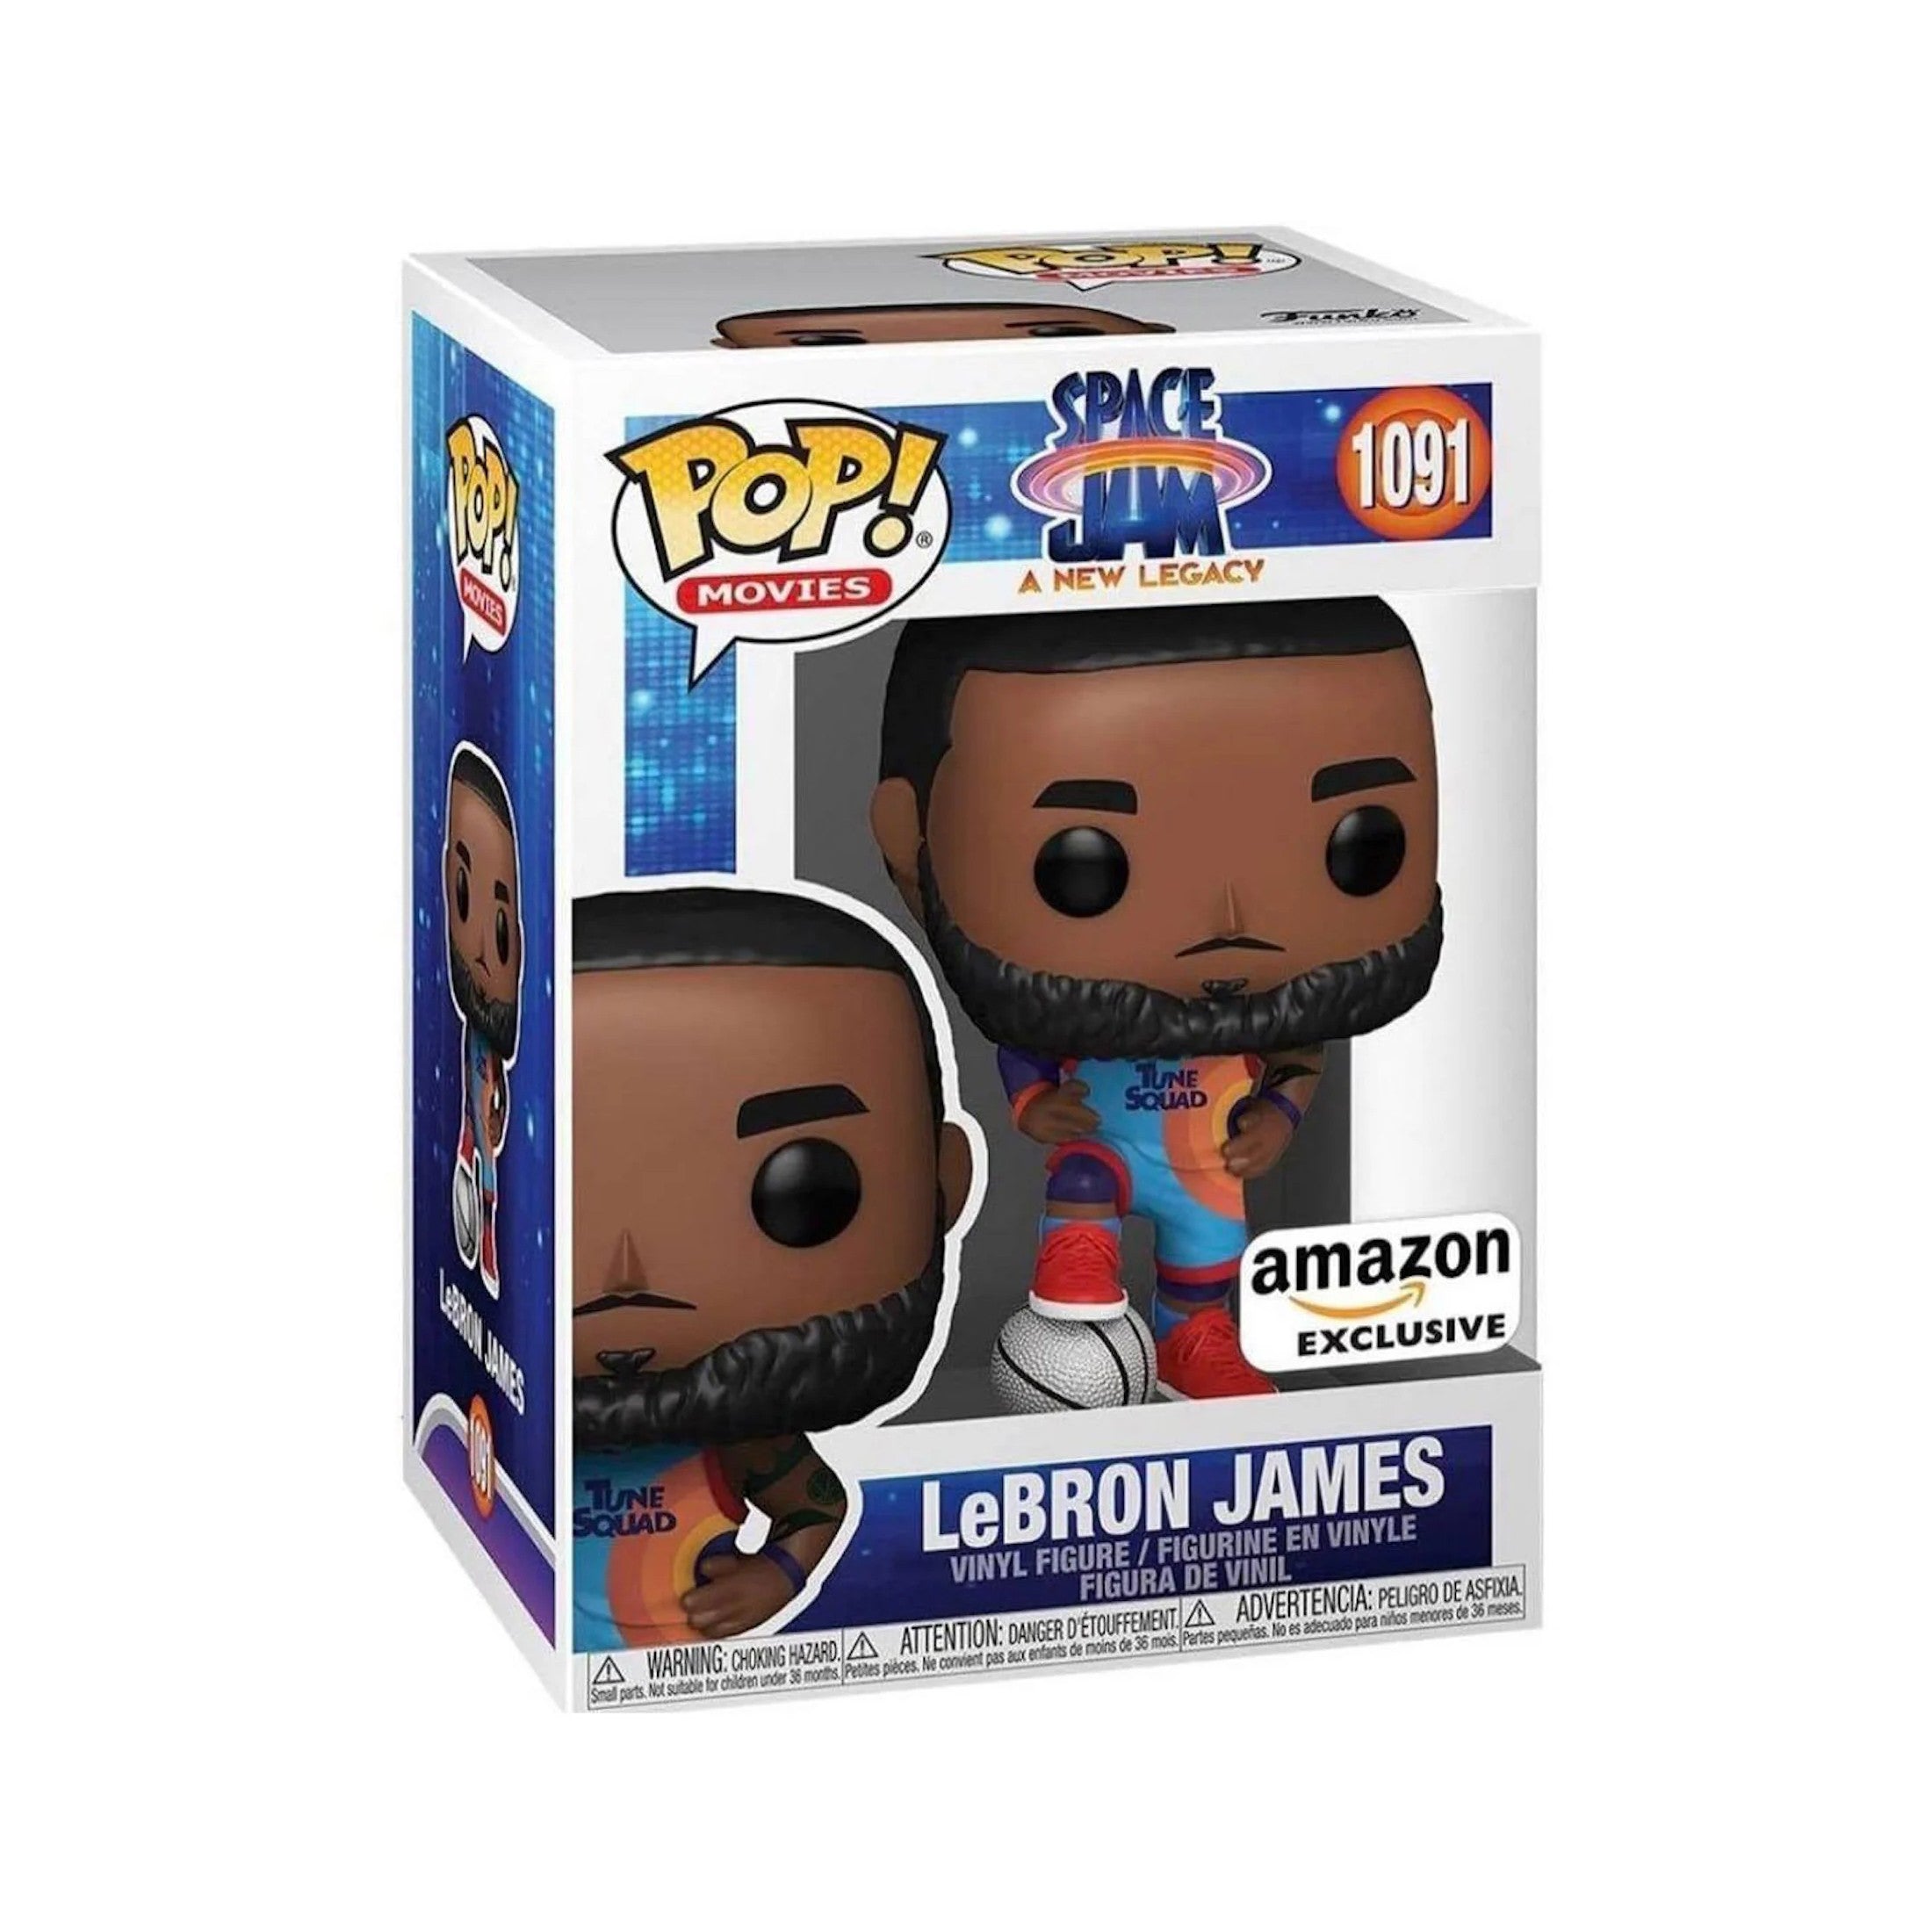 Space Jam A New Legacy LeBron James By Funko POP! (Amazon Exclusive)